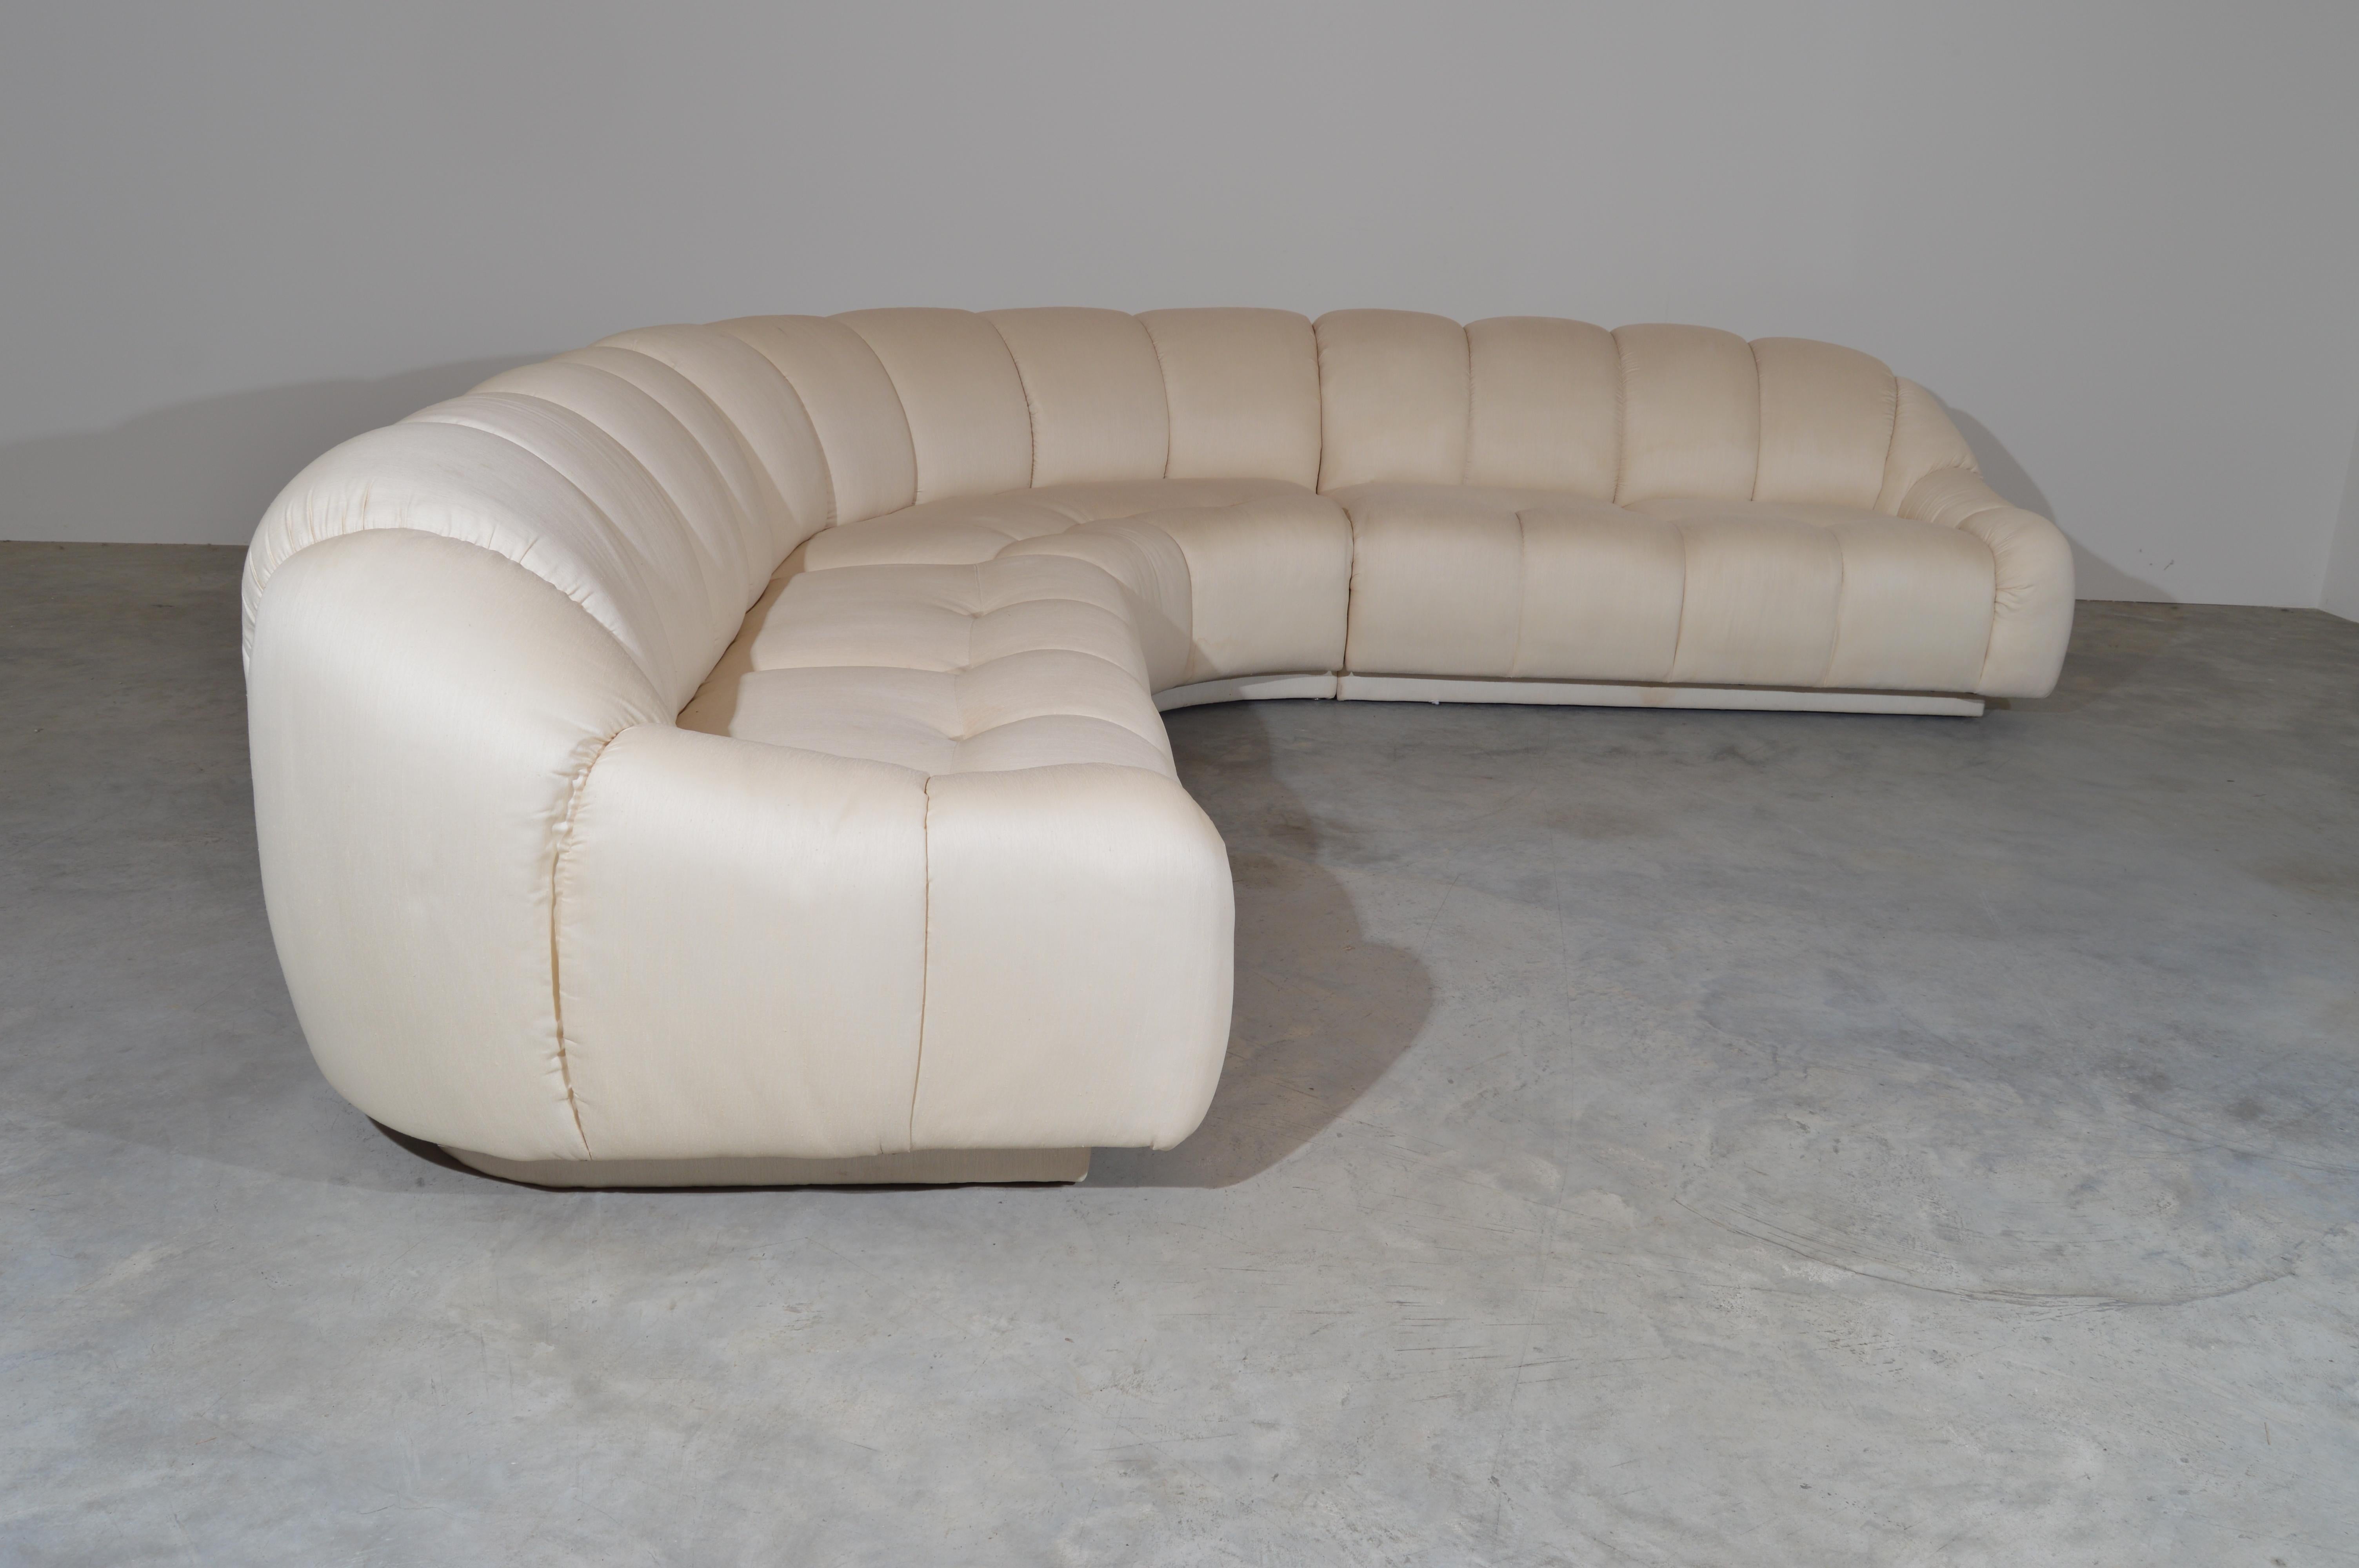 Channel Tufted Sectional Sofa in the Manner of Steve Chase circa 1980 1